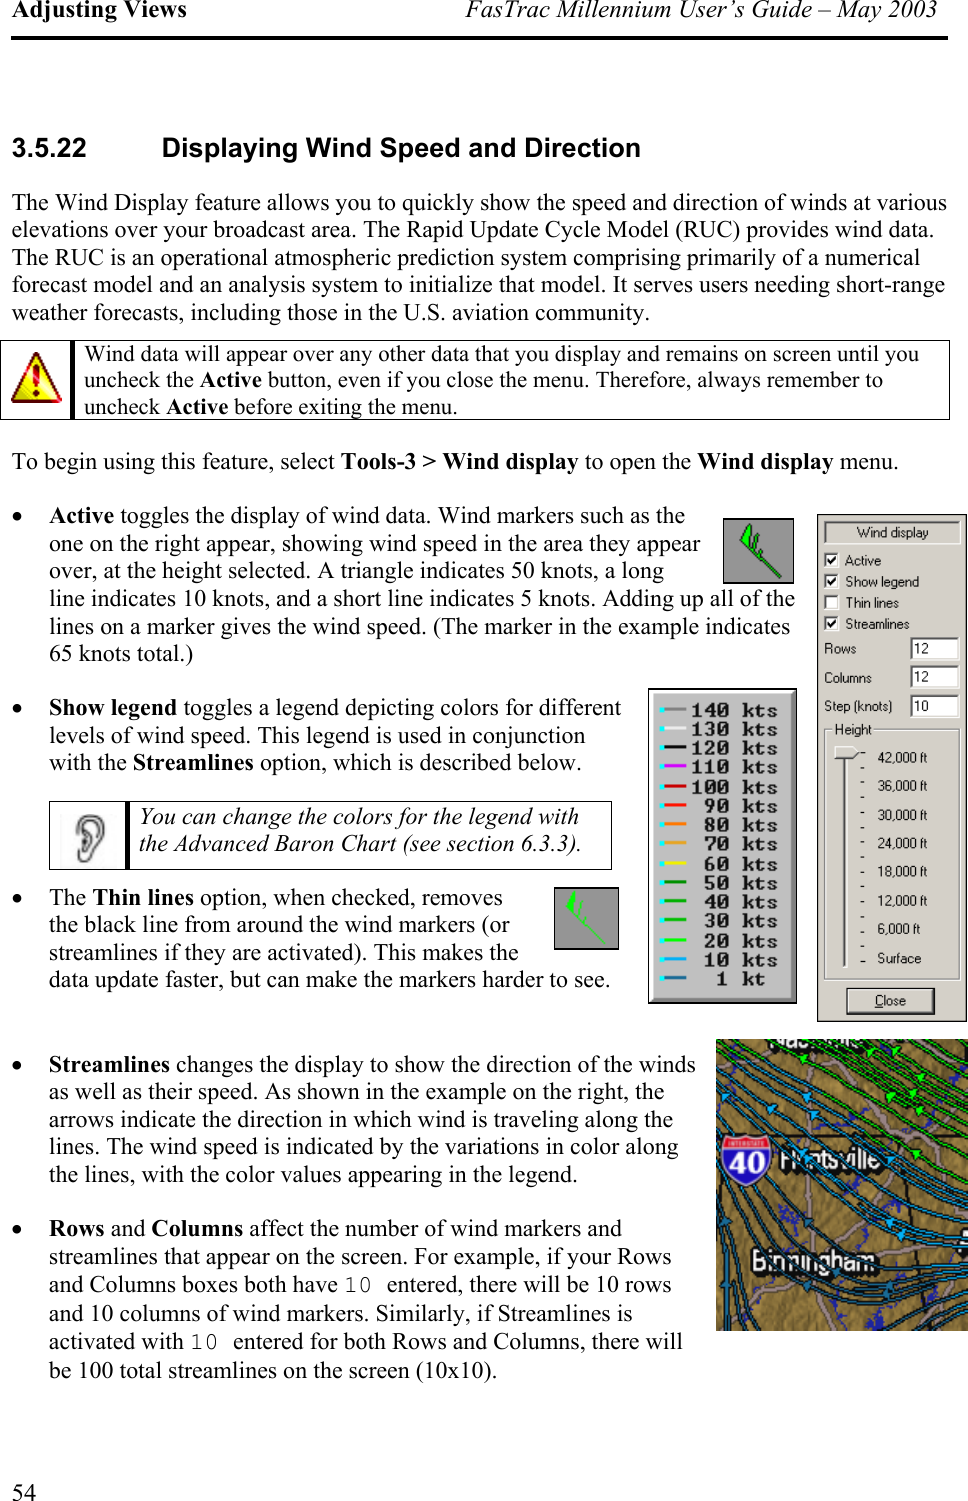 Adjusting Views  FasTrac Millennium User’s Guide – May 2003 3.5.22  Displaying Wind Speed and Direction The Wind Display feature allows you to quickly show the speed and direction of winds at various elevations over your broadcast area. The Rapid Update Cycle Model (RUC) provides wind data. The RUC is an operational atmospheric prediction system comprising primarily of a numerical forecast model and an analysis system to initialize that model. It serves users needing short-range weather forecasts, including those in the U.S. aviation community.   Wind data will appear over any other data that you display and remains on screen until you uncheck the Active button, even if you close the menu. Therefore, always remember to uncheck Active before exiting the menu. To begin using this feature, select Tools-3 &gt; Wind display to open the Wind display menu. •  Active toggles the display of wind data. Wind markers such as the one on the right appear, showing wind speed in the area they appear over, at the height selected. A triangle indicates 50 knots, a long line indicates 10 knots, and a short line indicates 5 knots. Adding up all of the lines on a marker gives the wind speed. (The marker in the example indicates 65 knots total.) •  Show legend toggles a legend depicting colors for different levels of wind speed. This legend is used in conjunction with the Streamlines option, which is described below.  You can change the colors for the legend with the Advanced Baron Chart (see section 6.3.3). •  The Thin lines option, when checked, removes the black line from around the wind markers (or streamlines if they are activated). This makes the data update faster, but can make the markers harder to see.  •  Streamlines changes the display to show the direction of the winds as well as their speed. As shown in the example on the right, the arrows indicate the direction in which wind is traveling along the lines. The wind speed is indicated by the variations in color along the lines, with the color values appearing in the legend. •  Rows and Columns affect the number of wind markers and streamlines that appear on the screen. For example, if your Rows and Columns boxes both have 10 entered, there will be 10 rows and 10 columns of wind markers. Similarly, if Streamlines is activated with 10 entered for both Rows and Columns, there will be 100 total streamlines on the screen (10x10). 54 